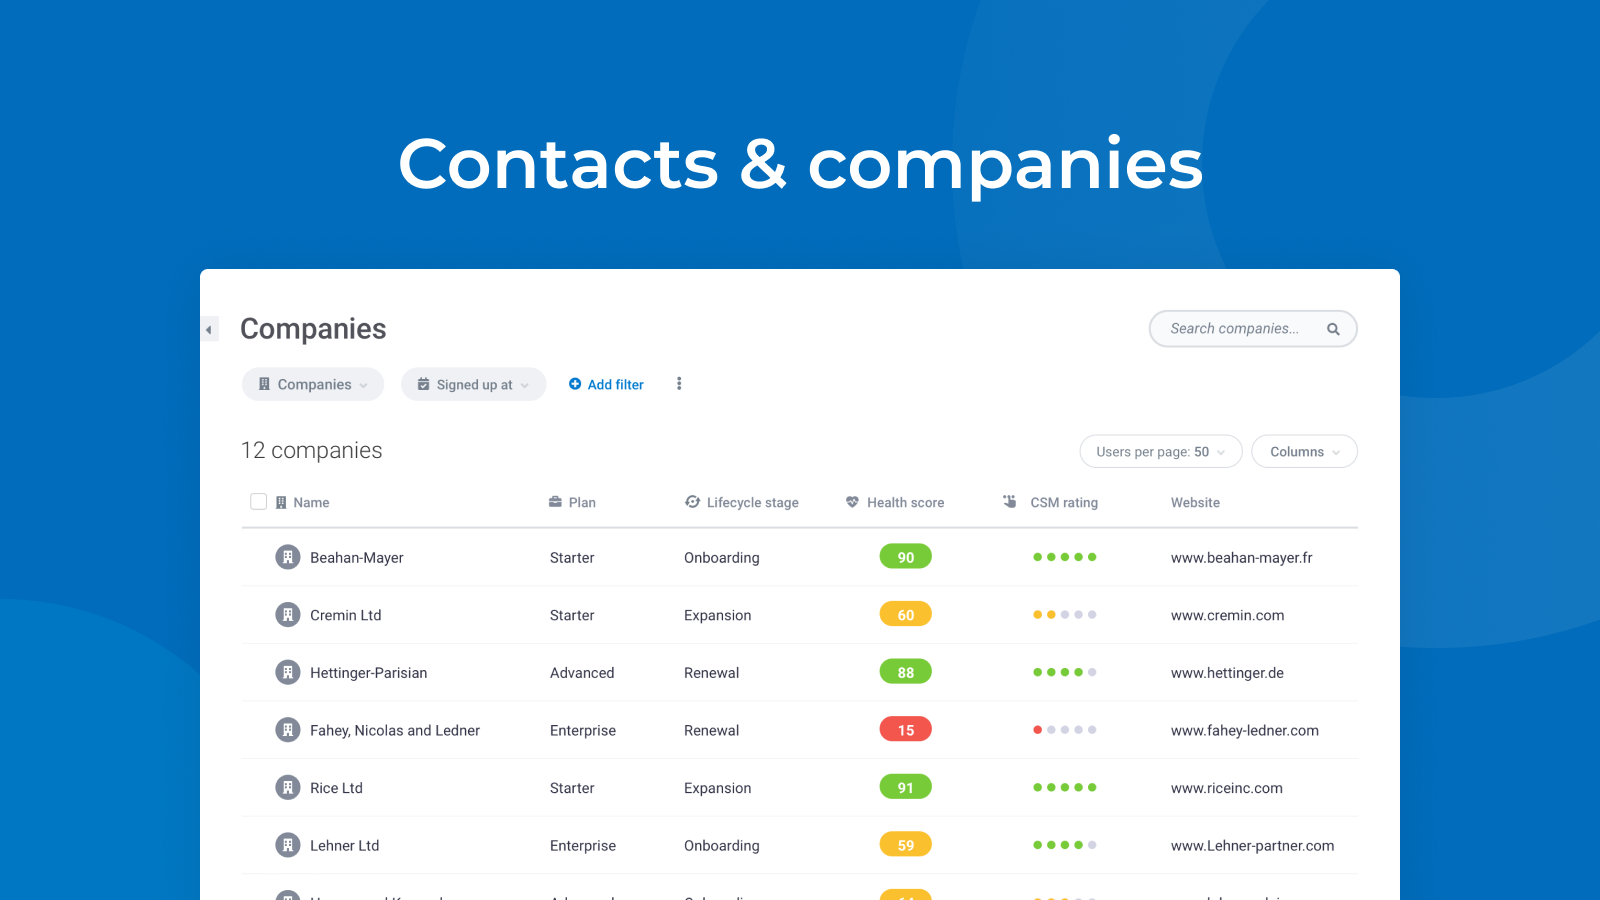 Keep your contacts and companies in sync